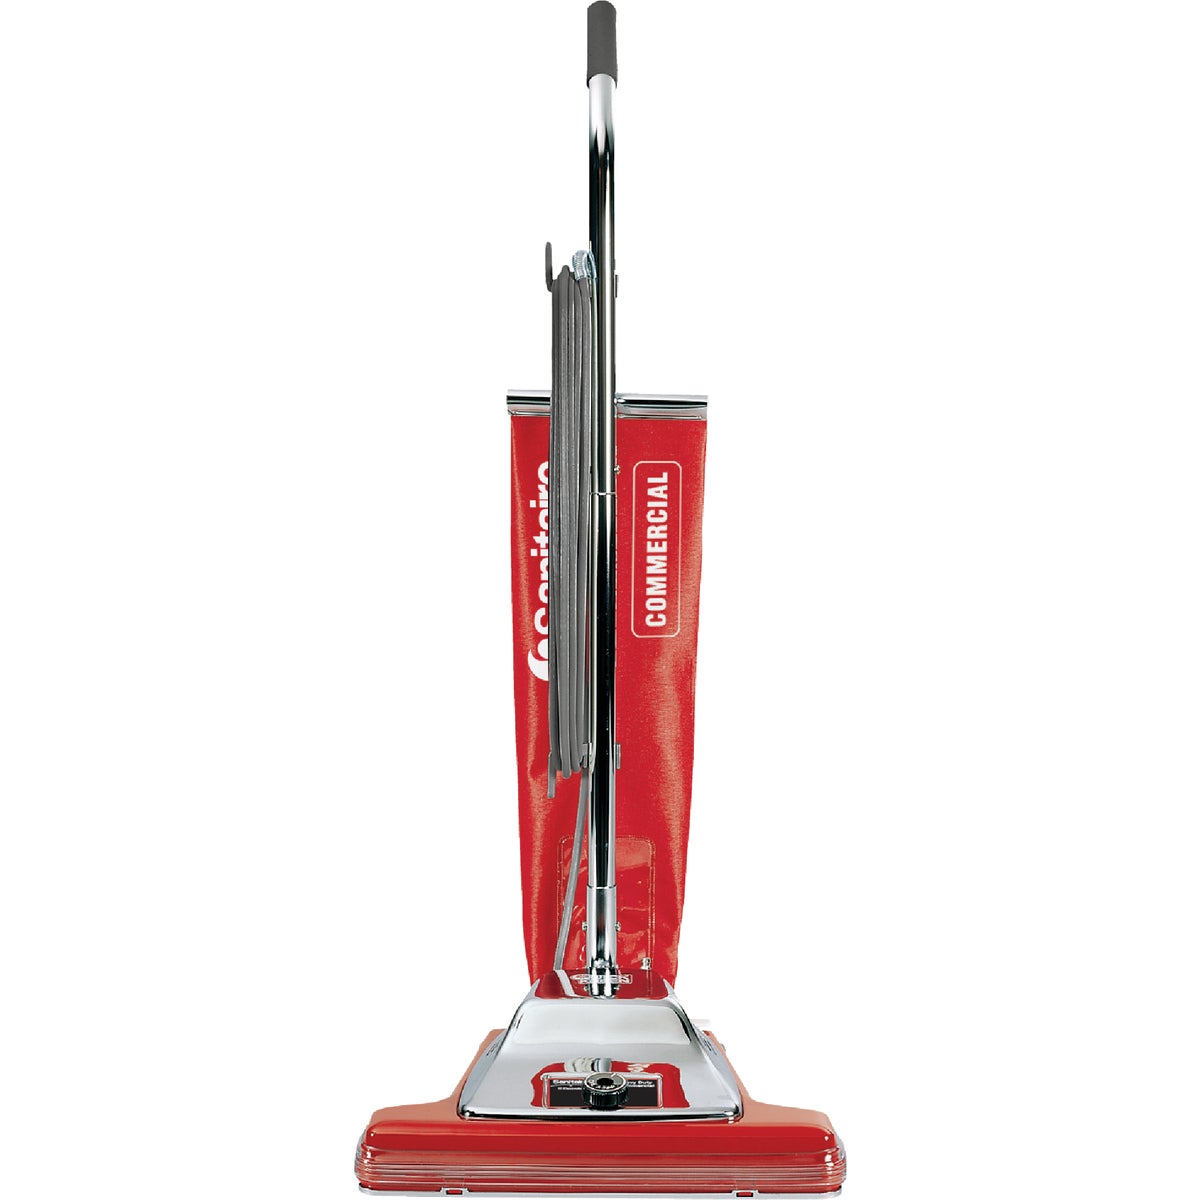 Sanitaire Tradition Wide Track 16 In. Commercial Upright Vacuum Cleaner